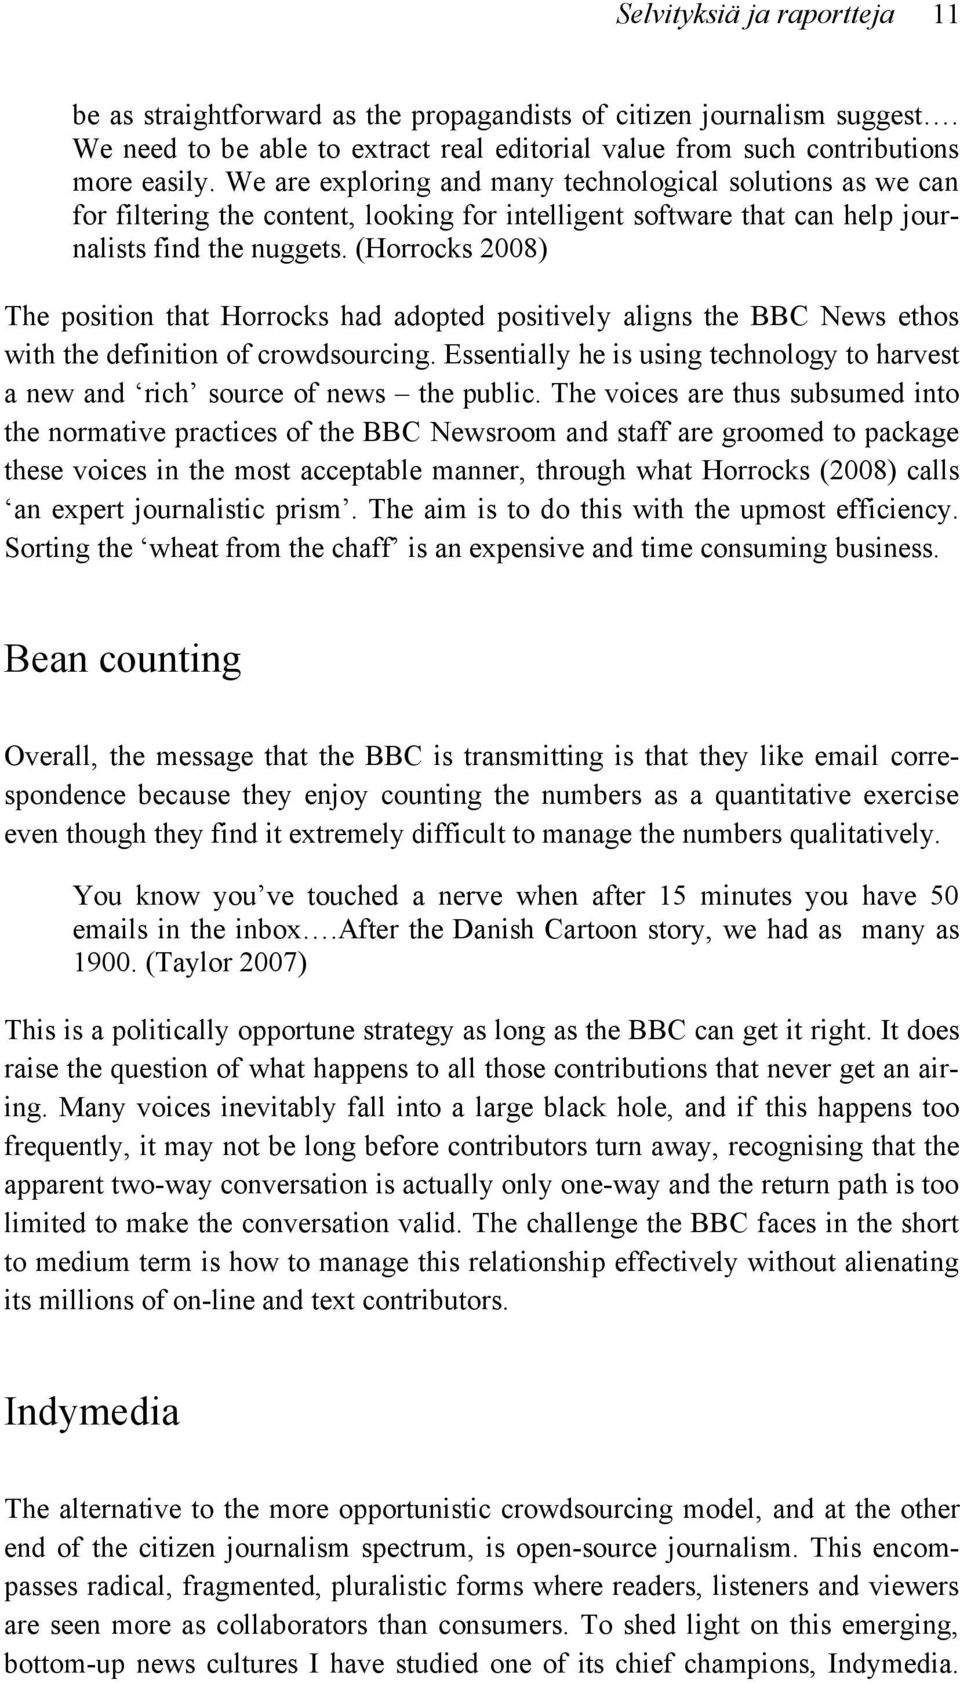 (Horrocks 2008) The position that Horrocks had adopted positively aligns the BBC News ethos with the definition of crowdsourcing.